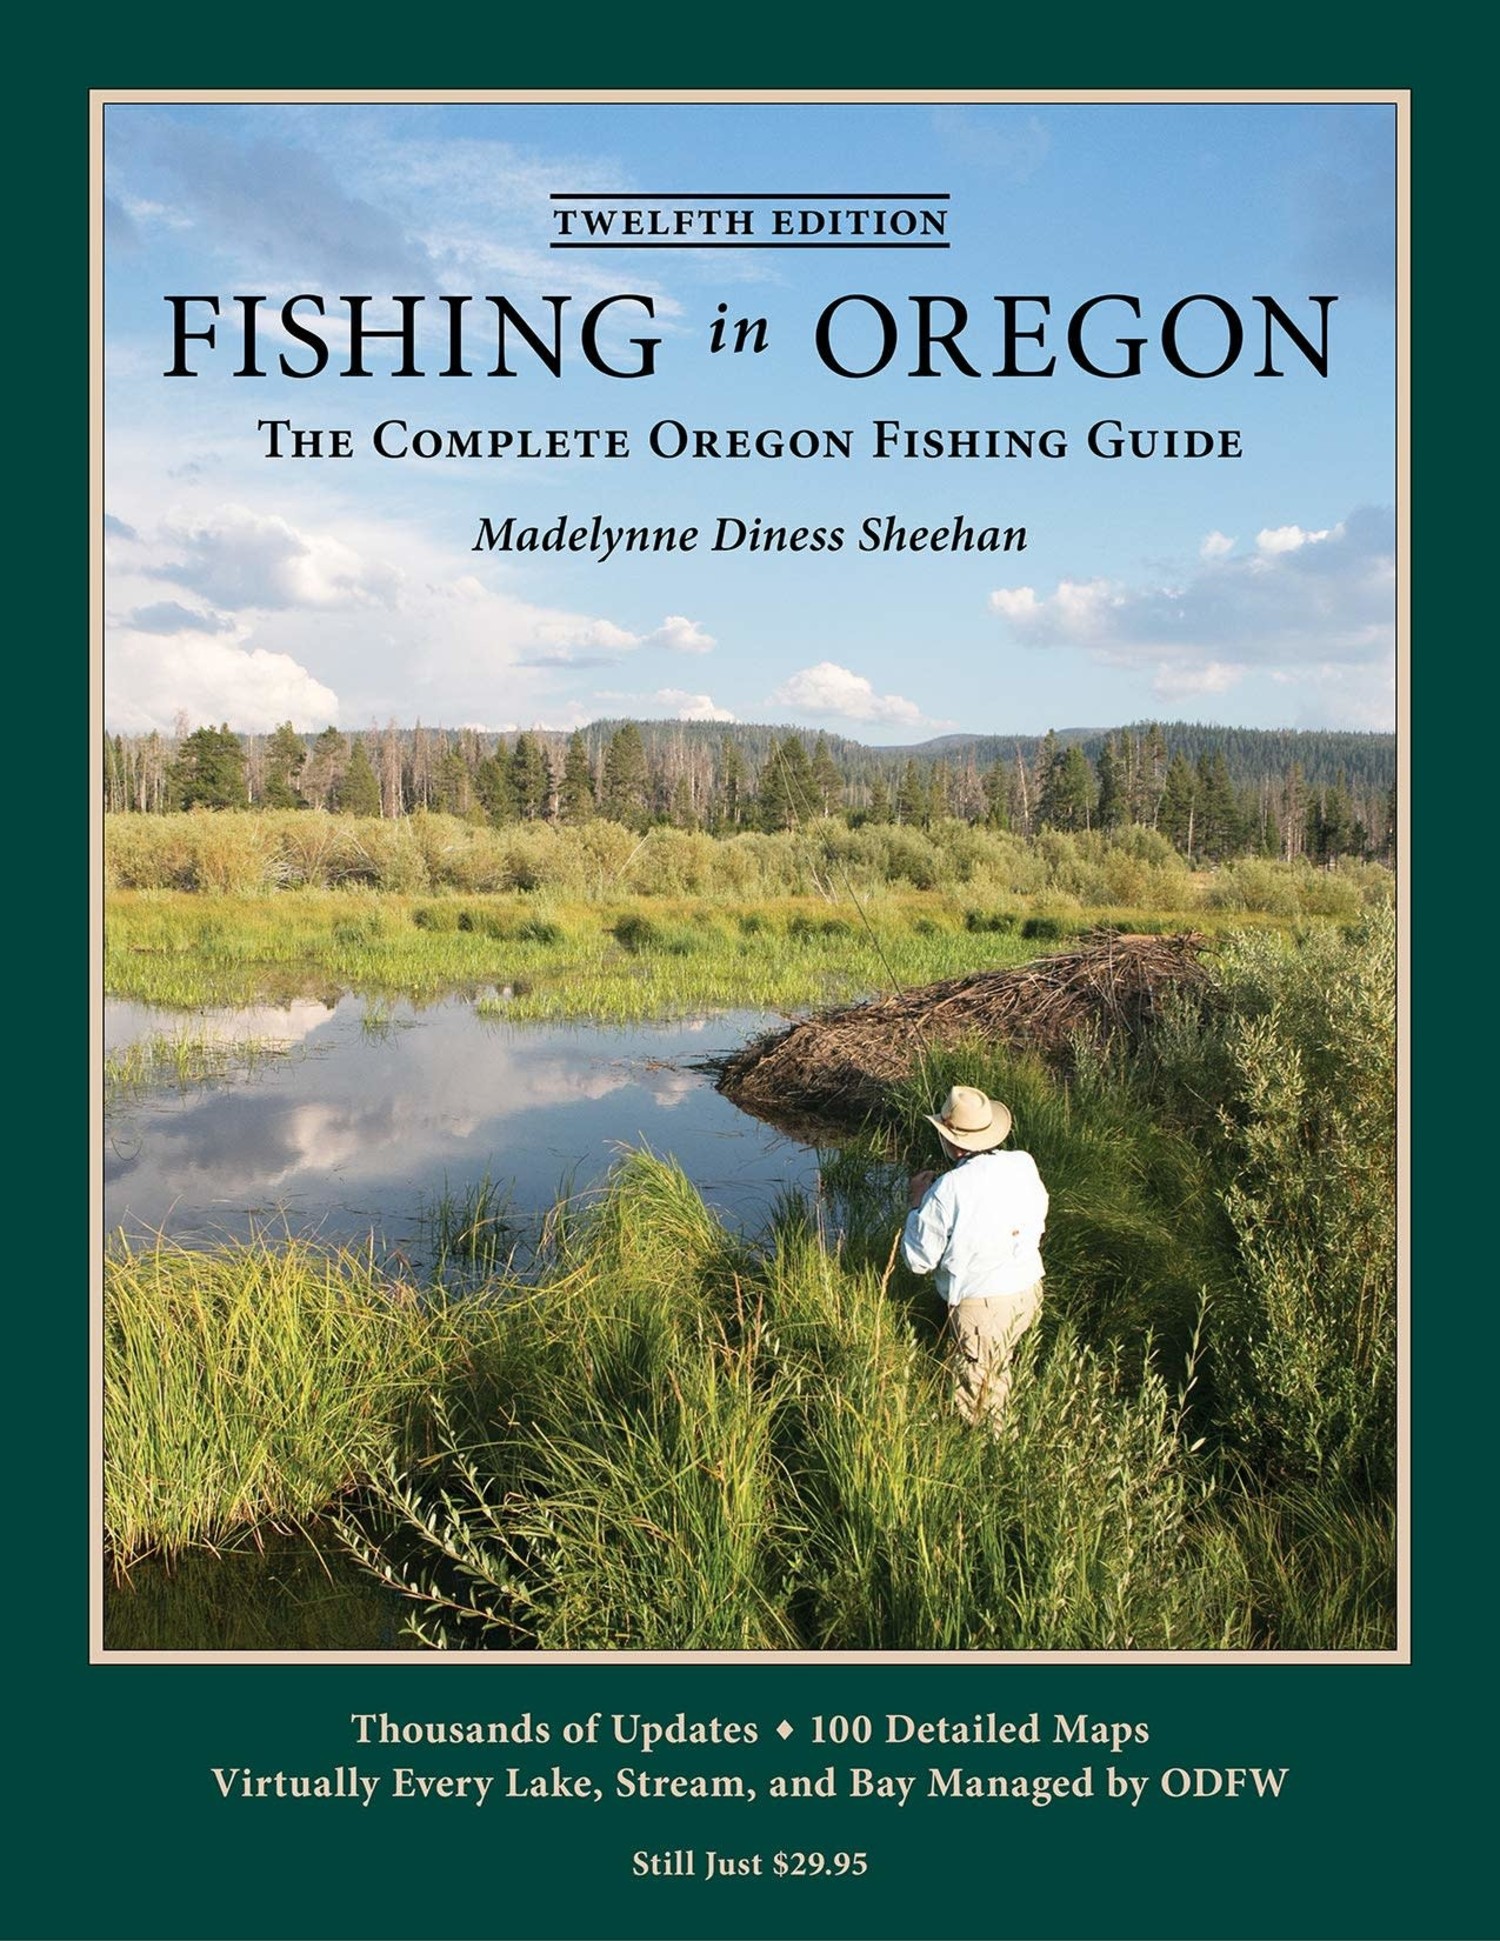 Fishing in Oregon: The Complete Oregon Fishing Guide: Sheehan, Madelynne  Diness: 9780916473150: : Books